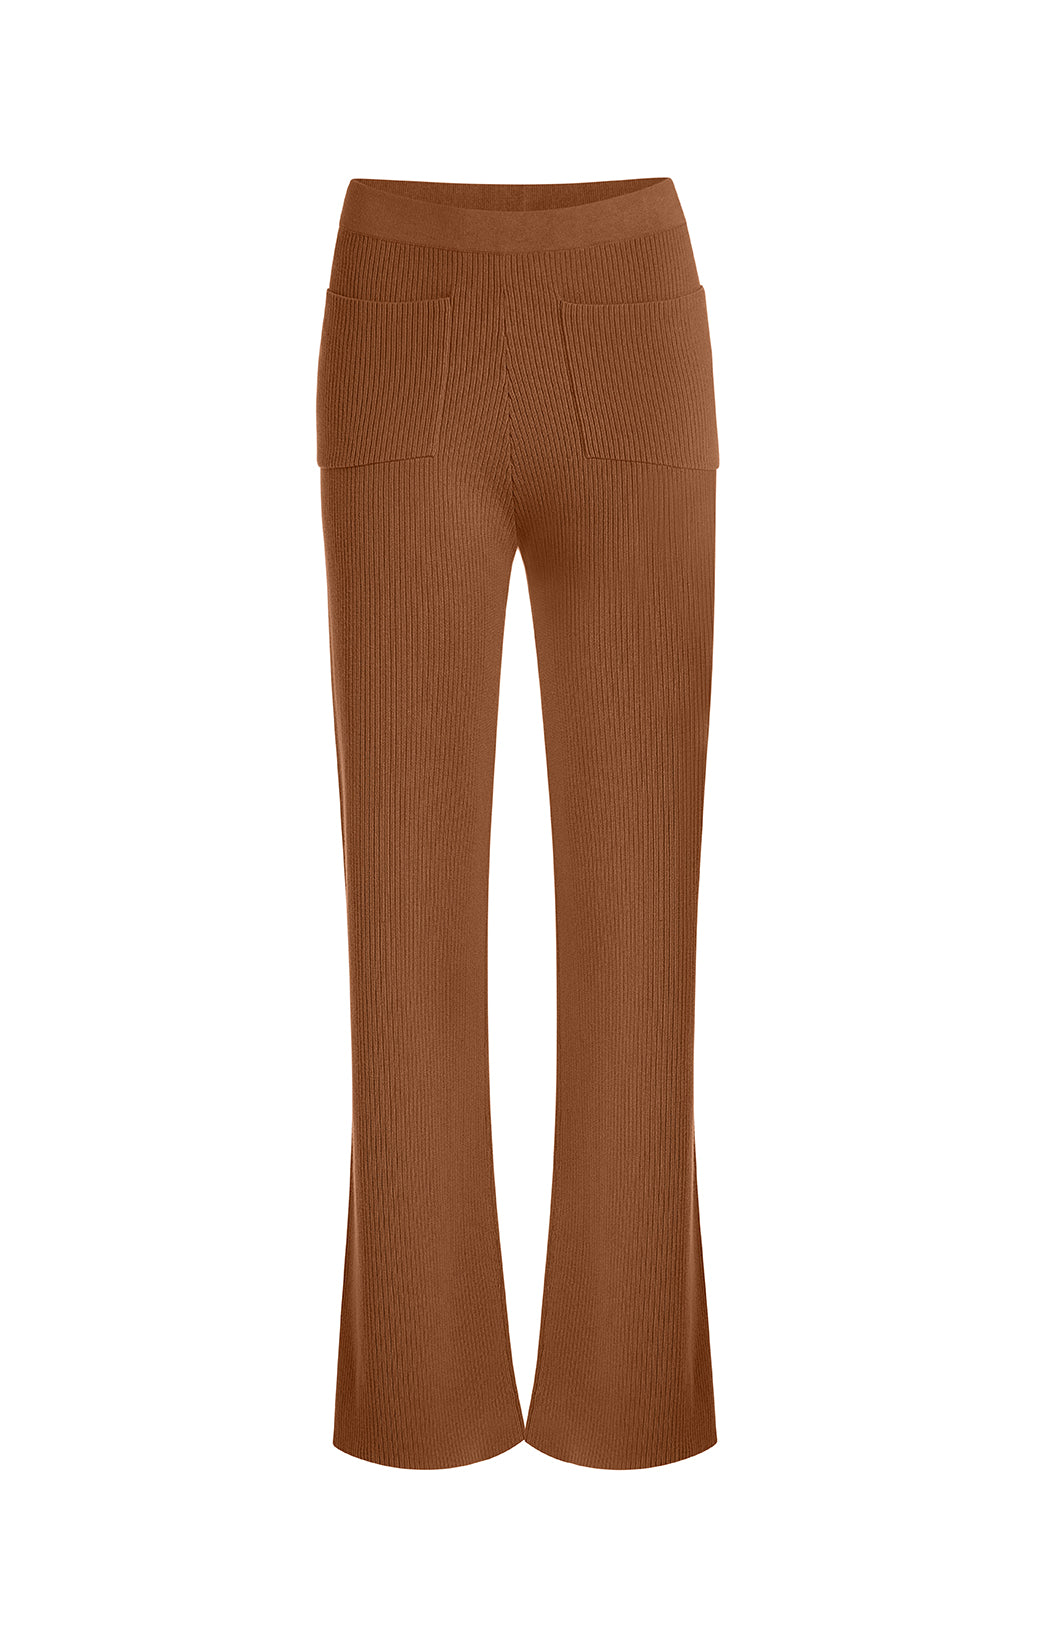 Grand Tier - Pleated Pinstripe Pants -  Product Image